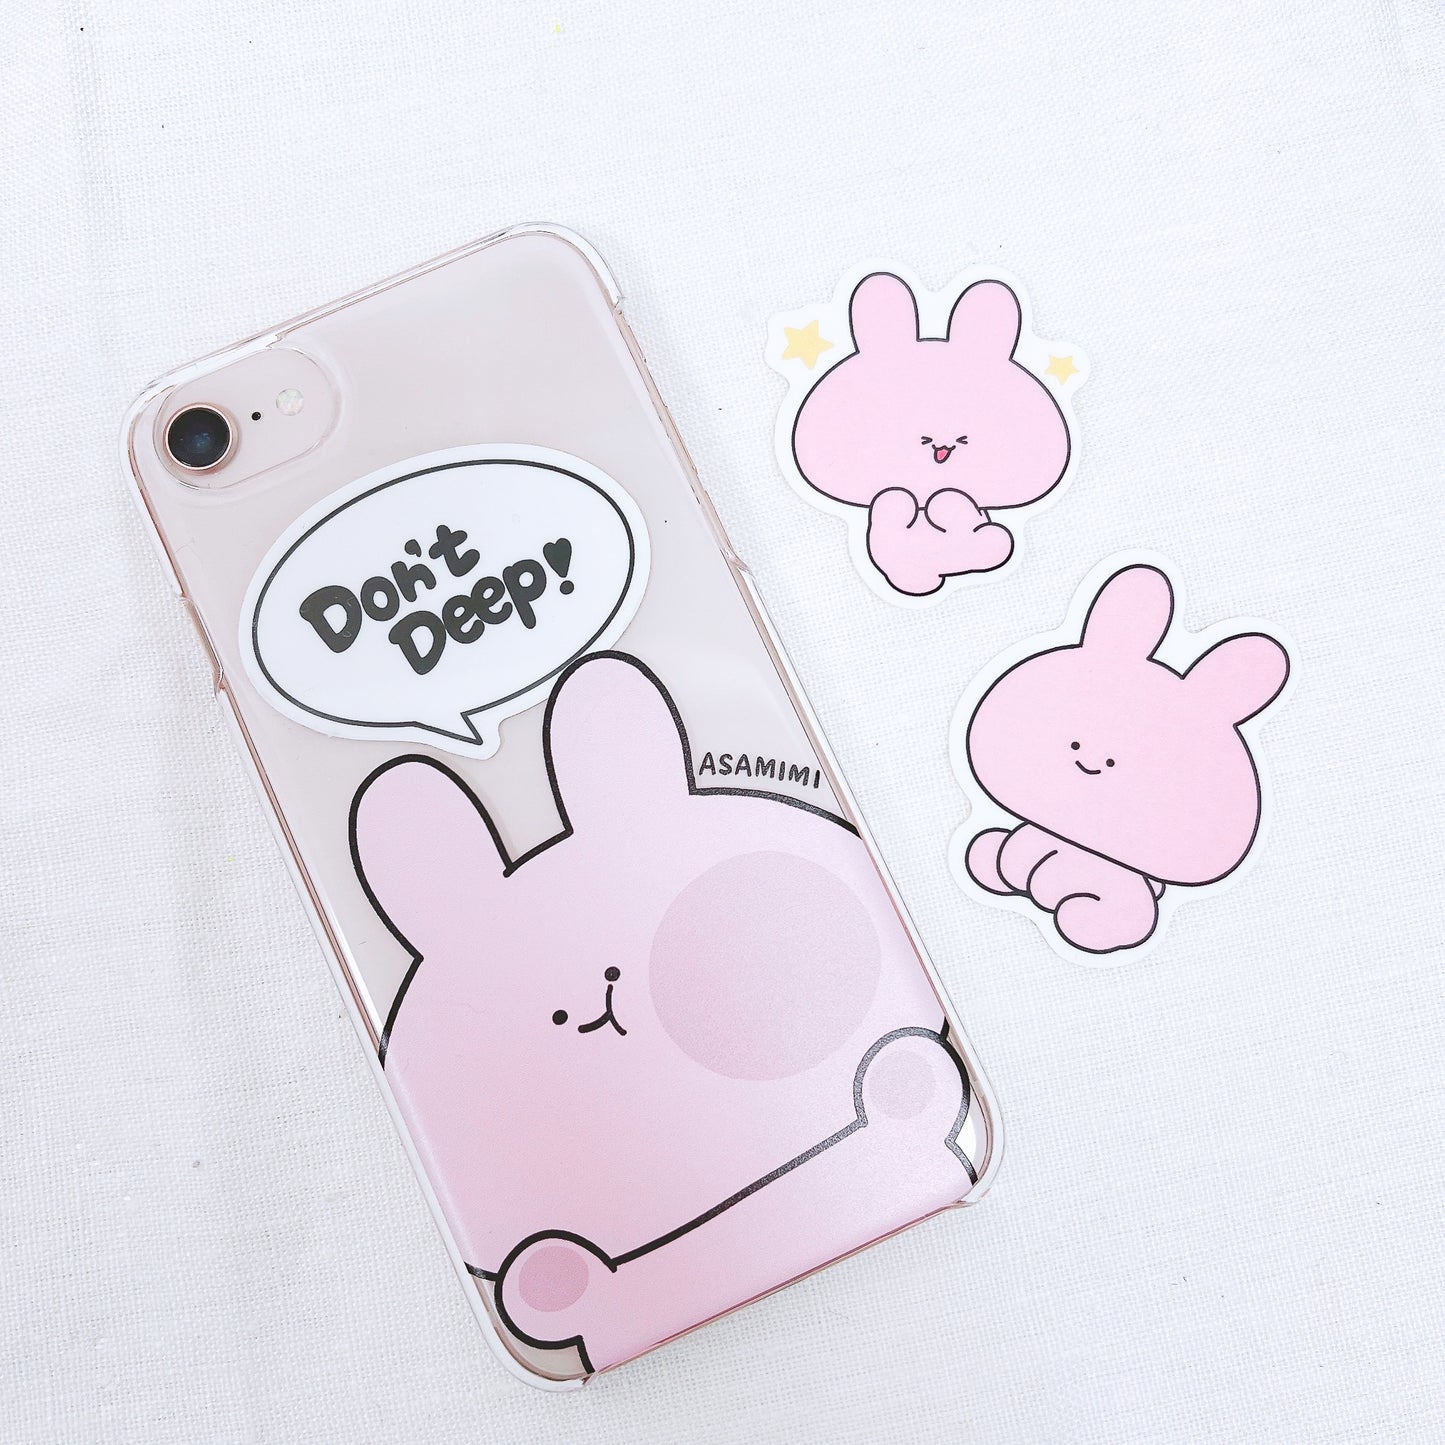 [Asamimi-chan] Smartphone case compatible with almost all models (BASIC) [Made to order]